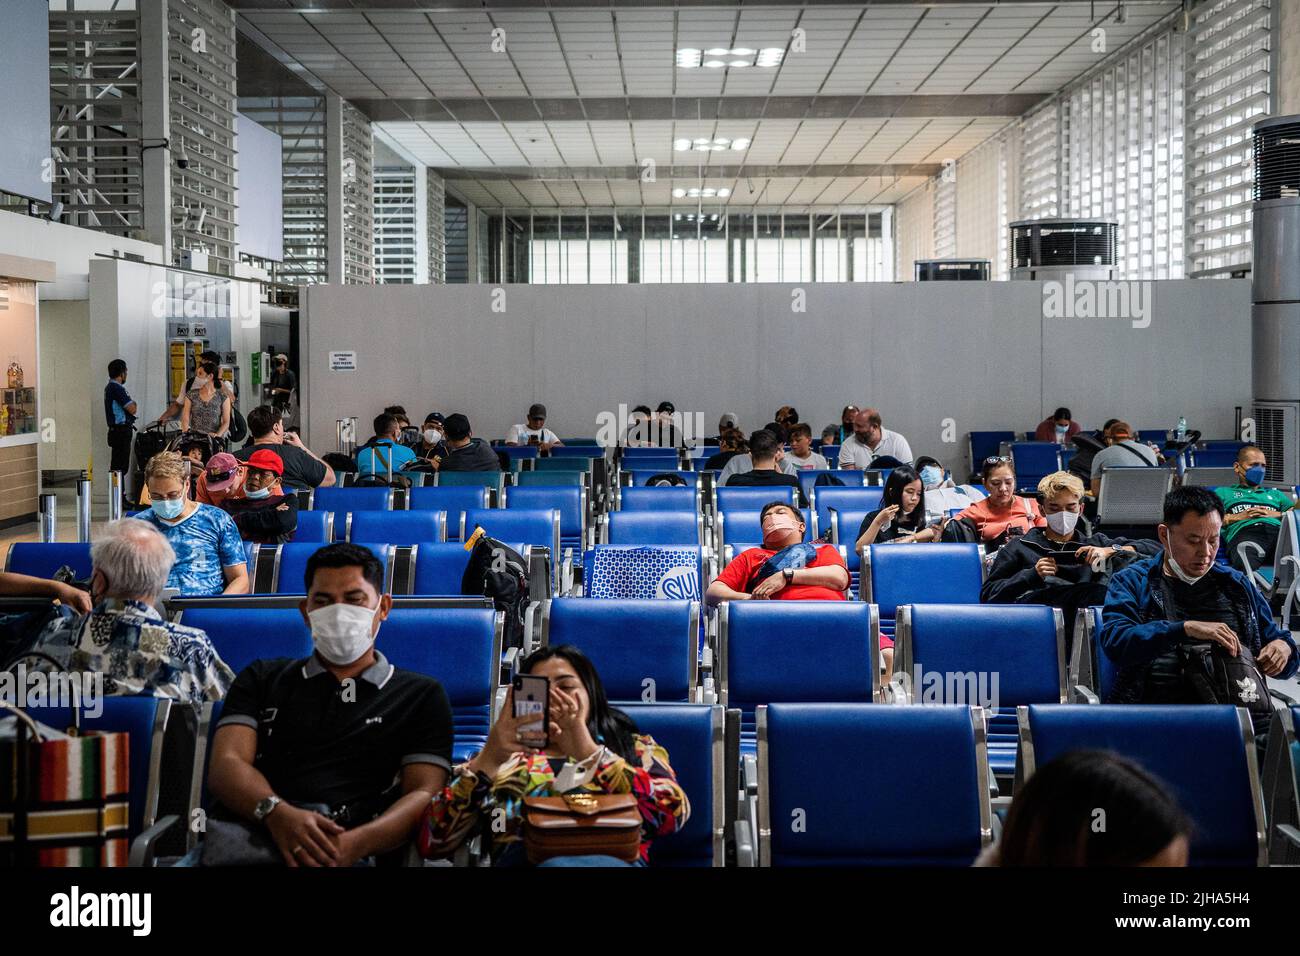 Manila, Philippines. 17 July 2022. A traveler wearing a face mask is seen sleeping at a boarding gate in the international departures terminal at Manila Ninoy Aquino International Airport (MNL). International travel continues amid a worldwide surge in COVID infections from the highly contagious BA.5 variant, leading some countries to roll back pandemic-era travel requirements, including mask mandates and updated vaccine requirements to include booster shots for visa-free entry. Matt Hunt / Neato Credit: Matt Hunt / Neato/Alamy Live News Stock Photo